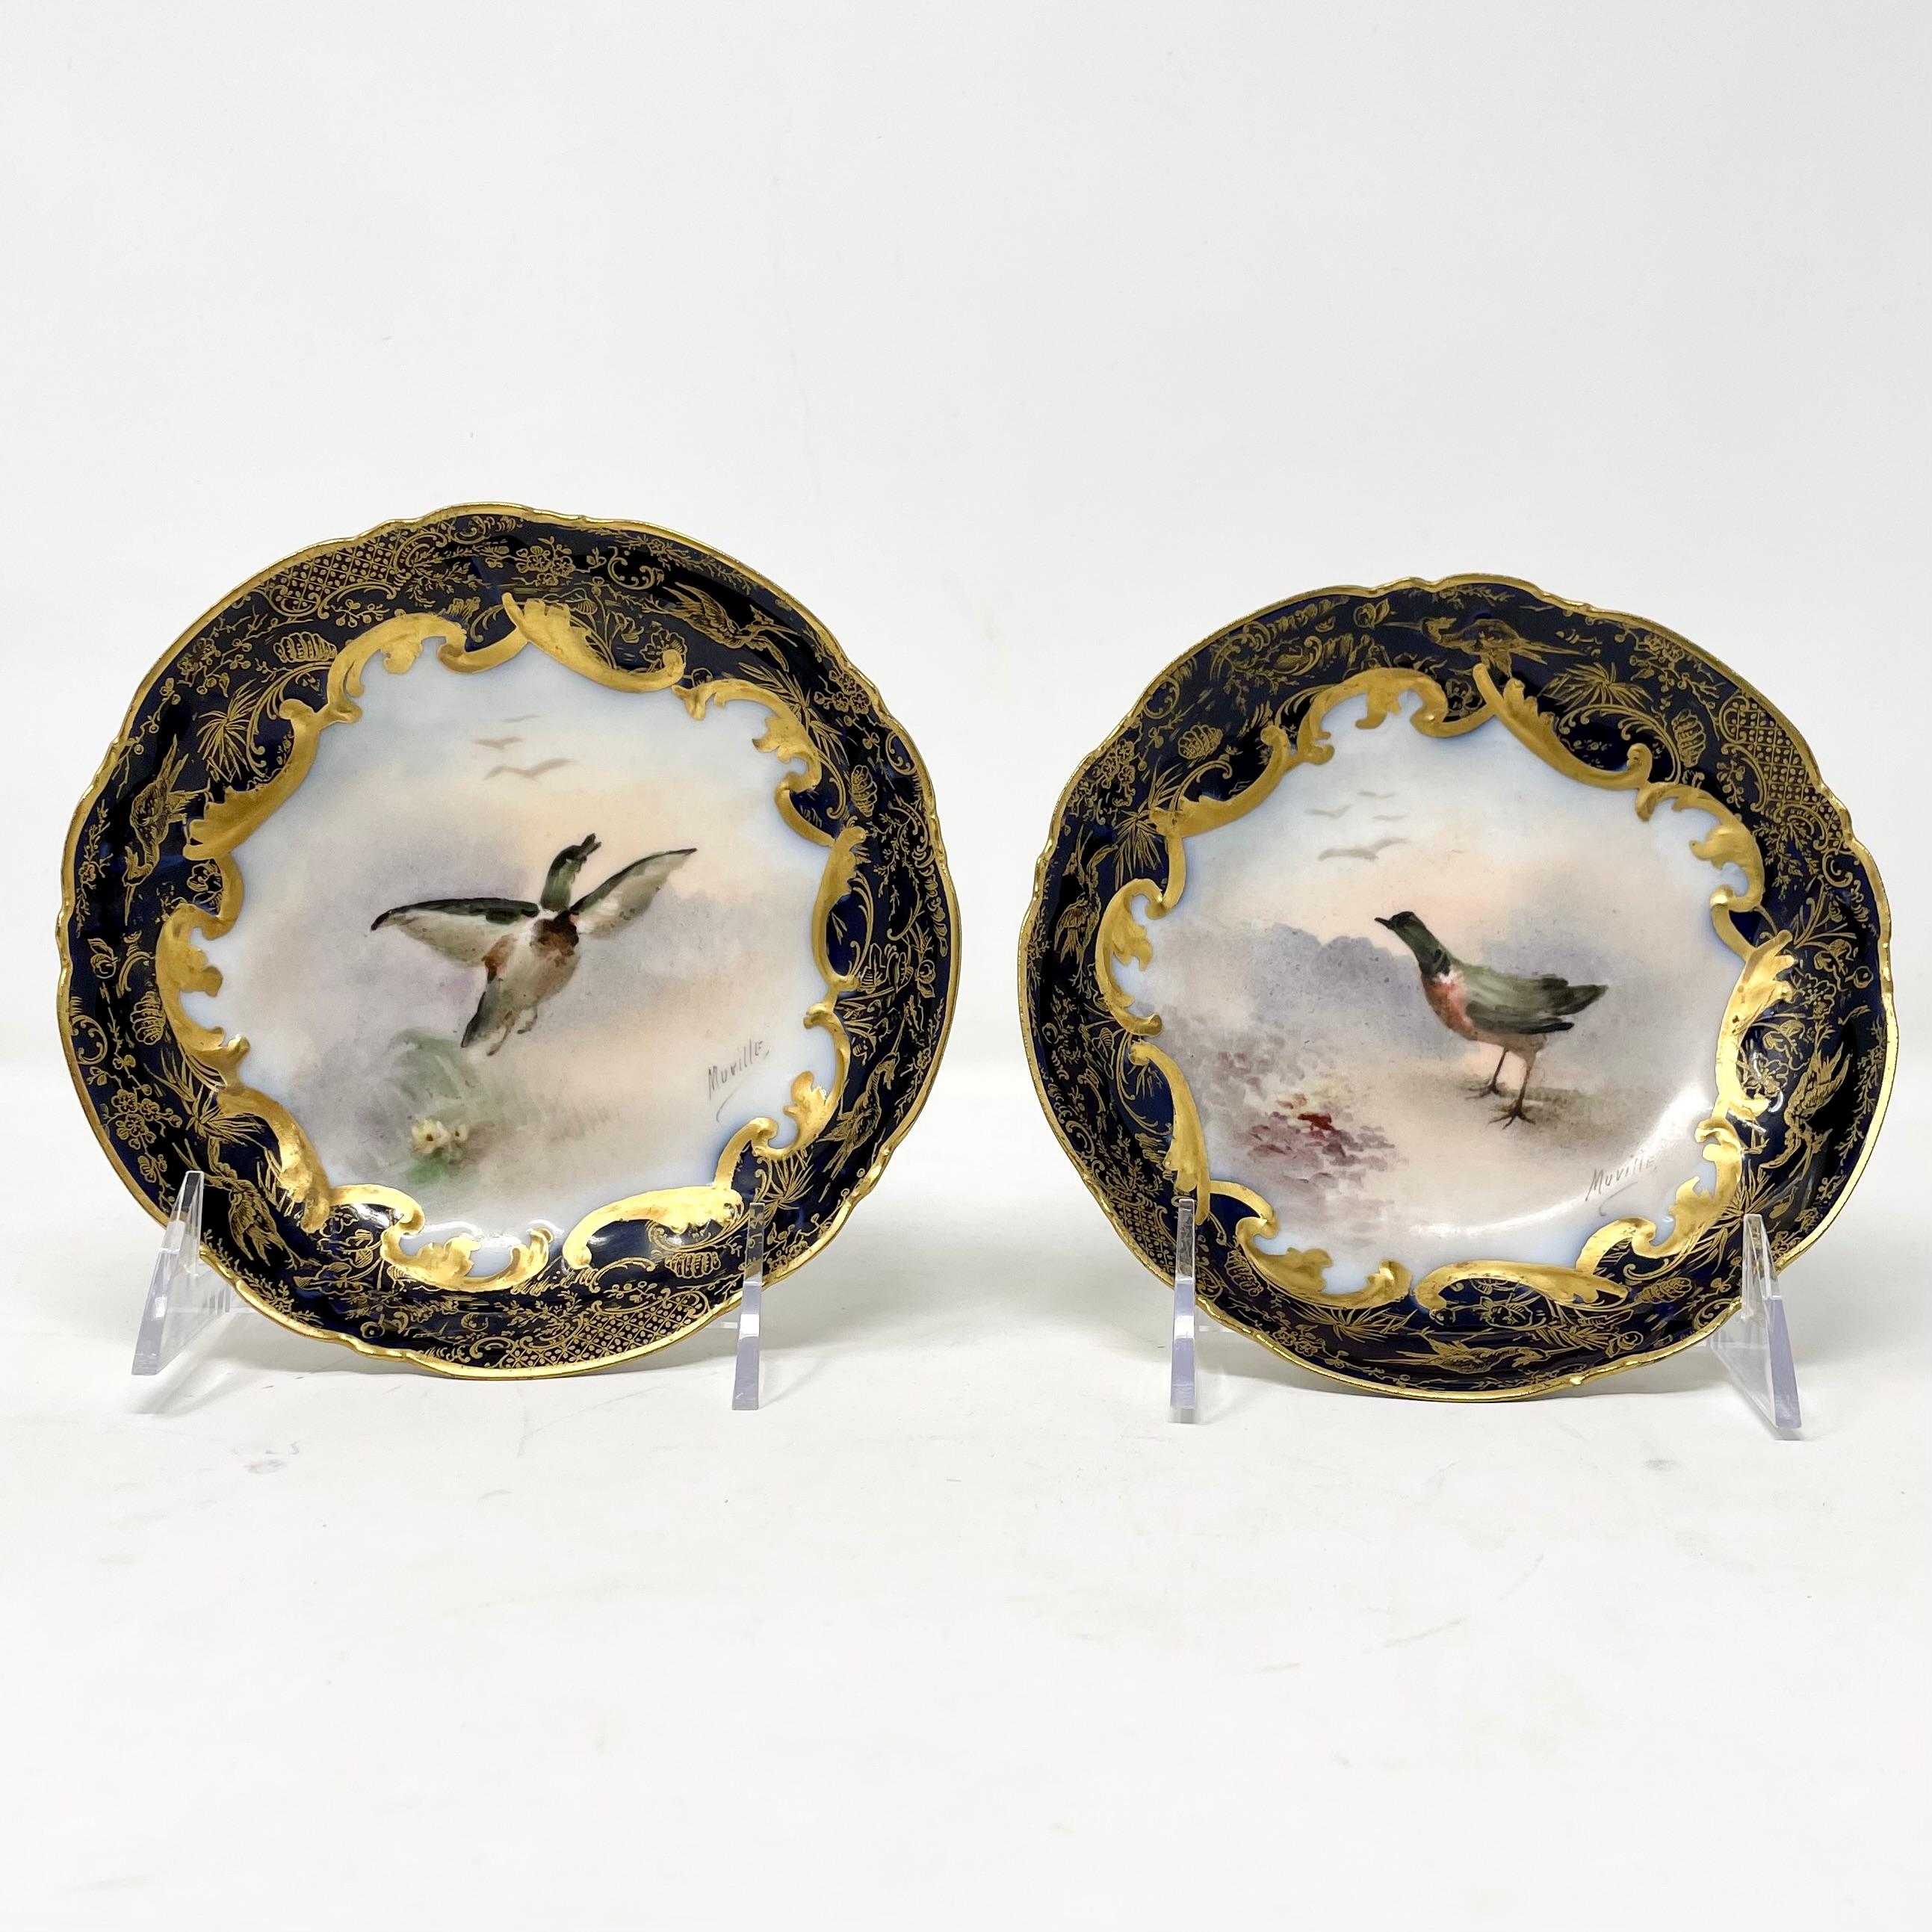 20th Century Set of 15 Antique French Hand-Painted Limoges Porcelain Games Set, circa 1900